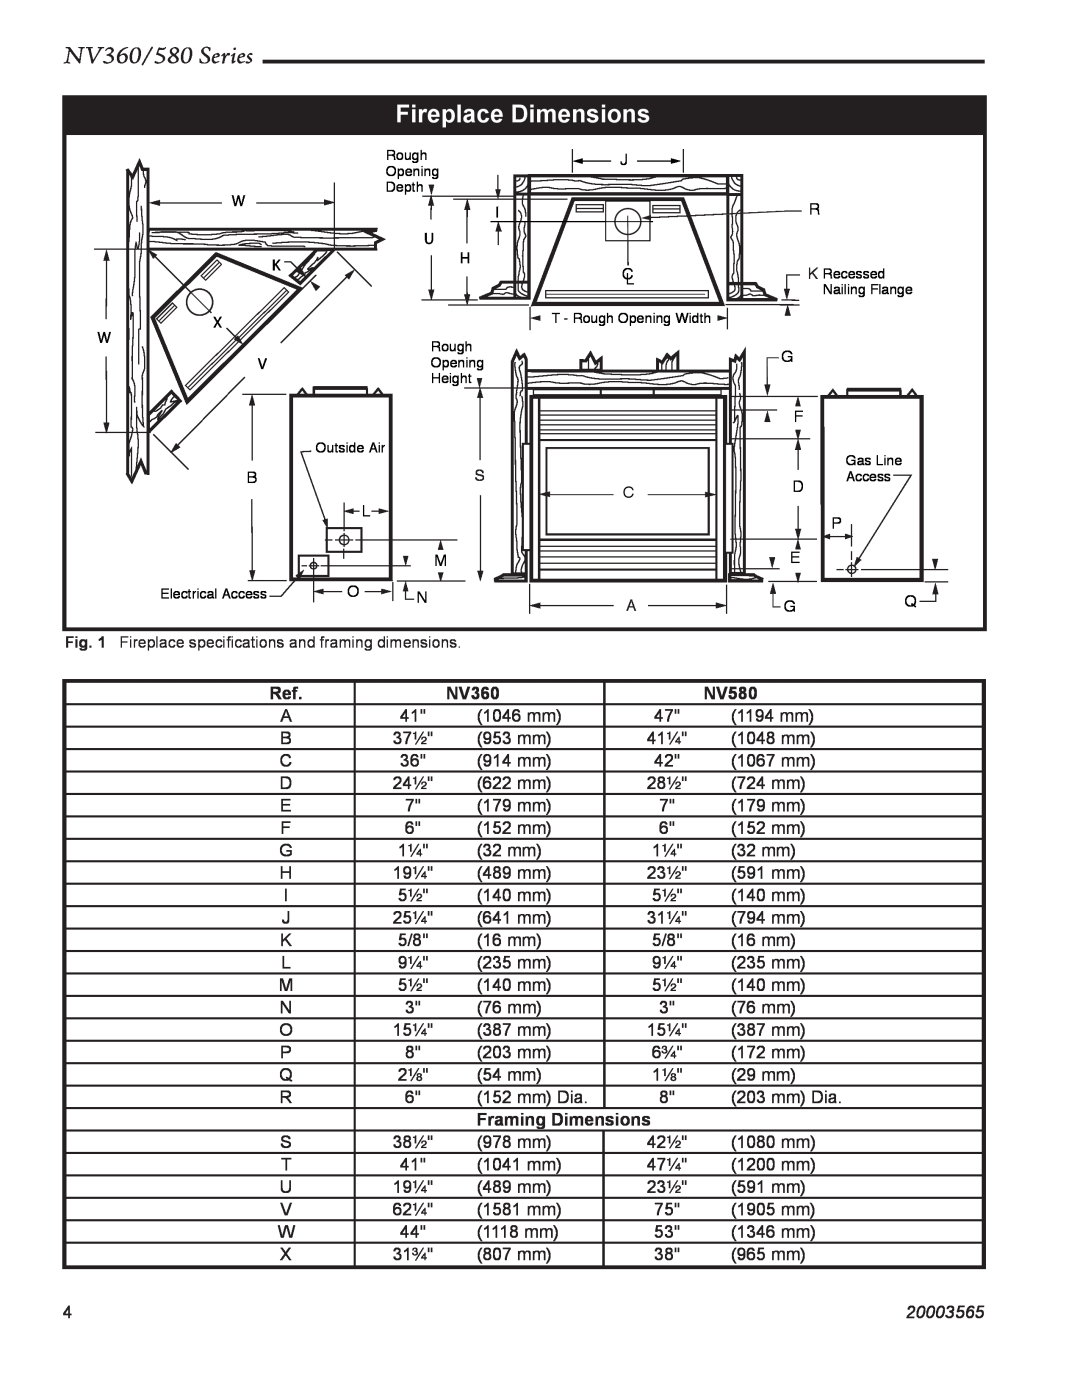 Vermont Casting manual Fireplace Dimensions, NV360/580 Series, NV580, Framing Dimensions, 20003565 